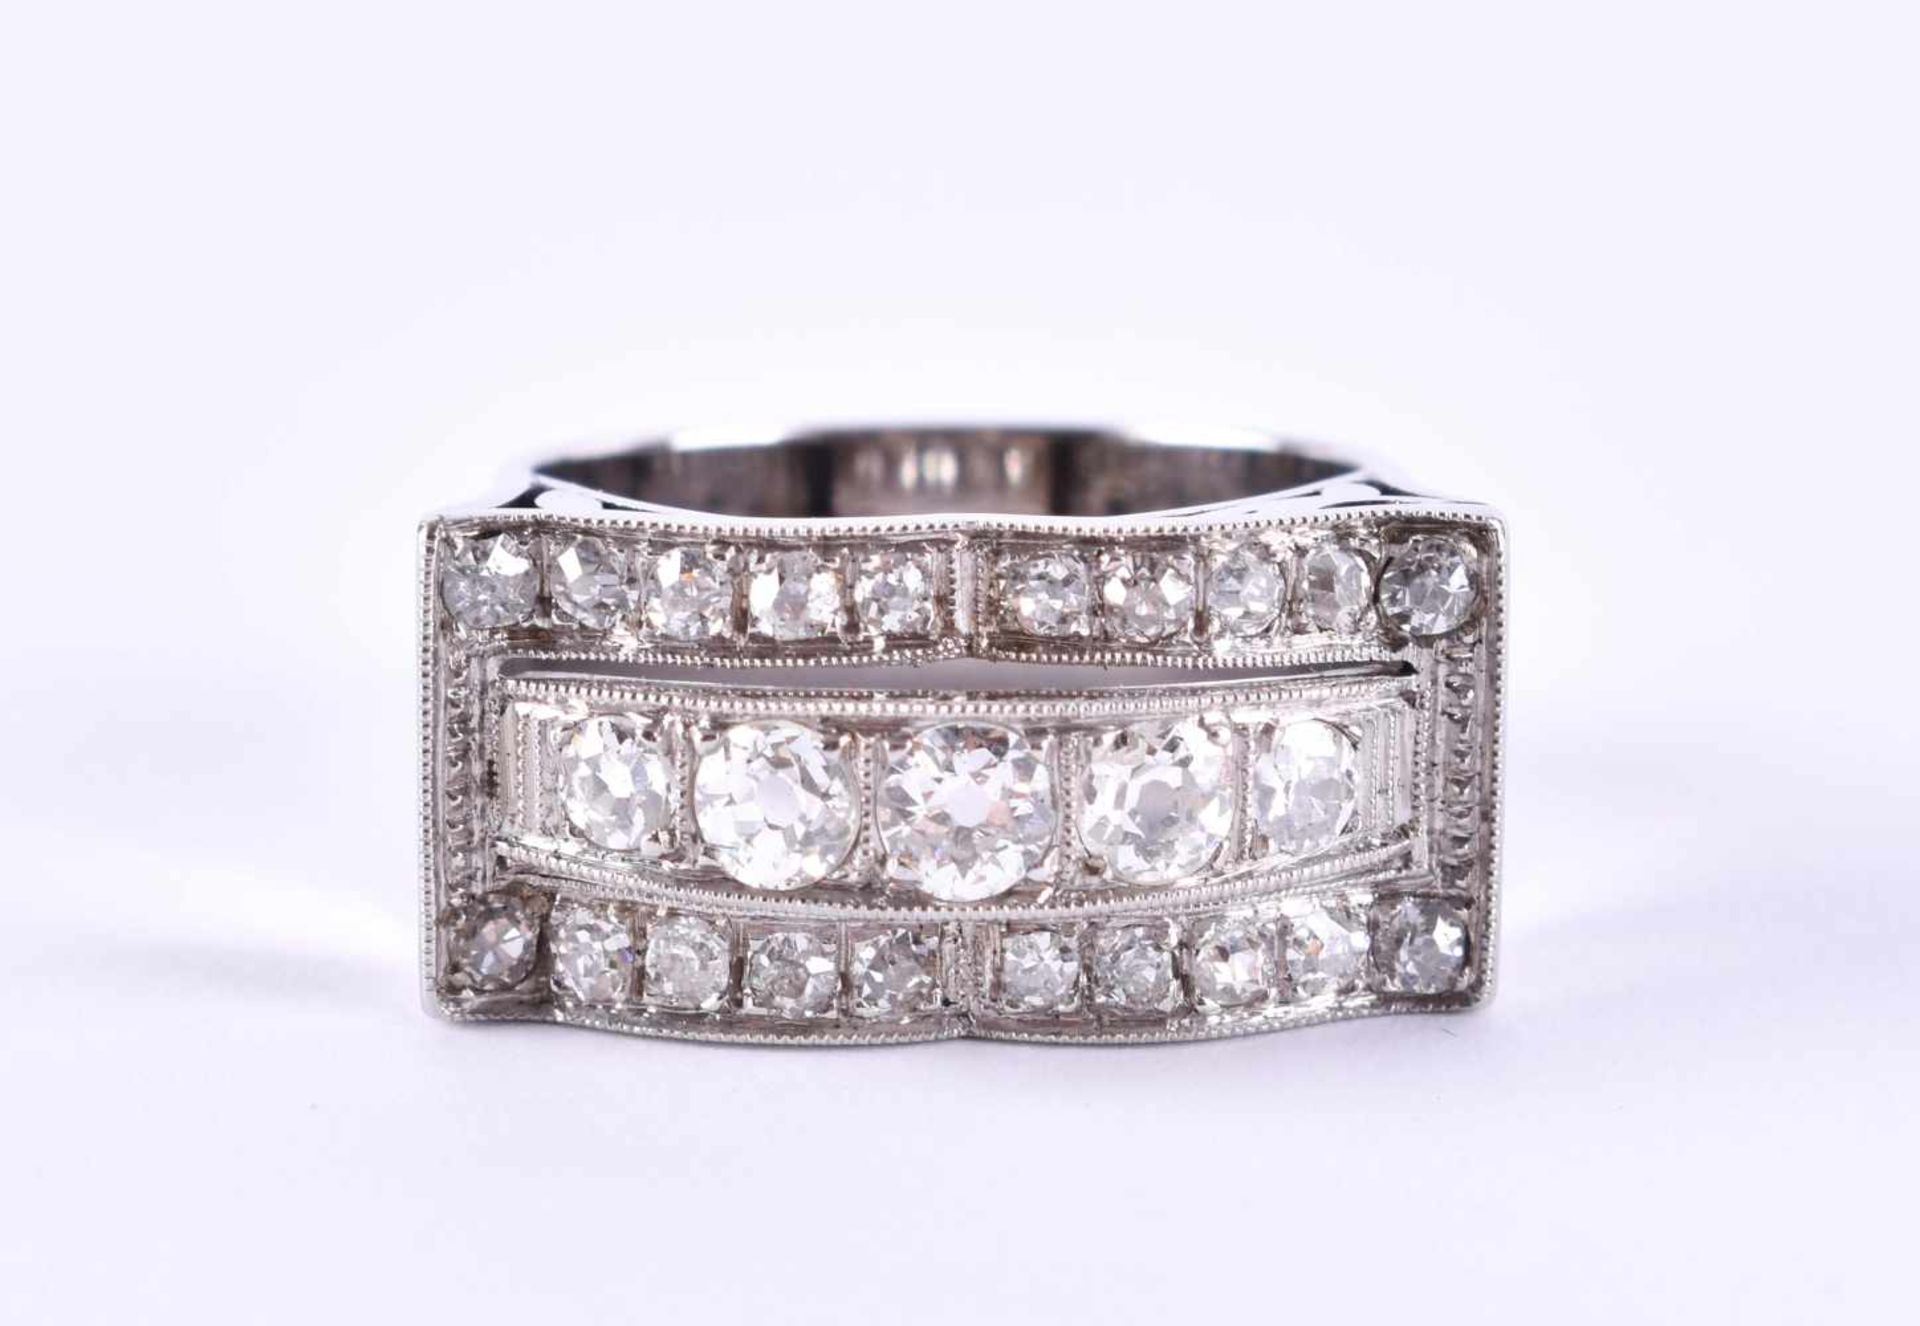 Art deco diamond ringwhite gold 585 tested, set with 25 white brilliants, together approx. 1.40